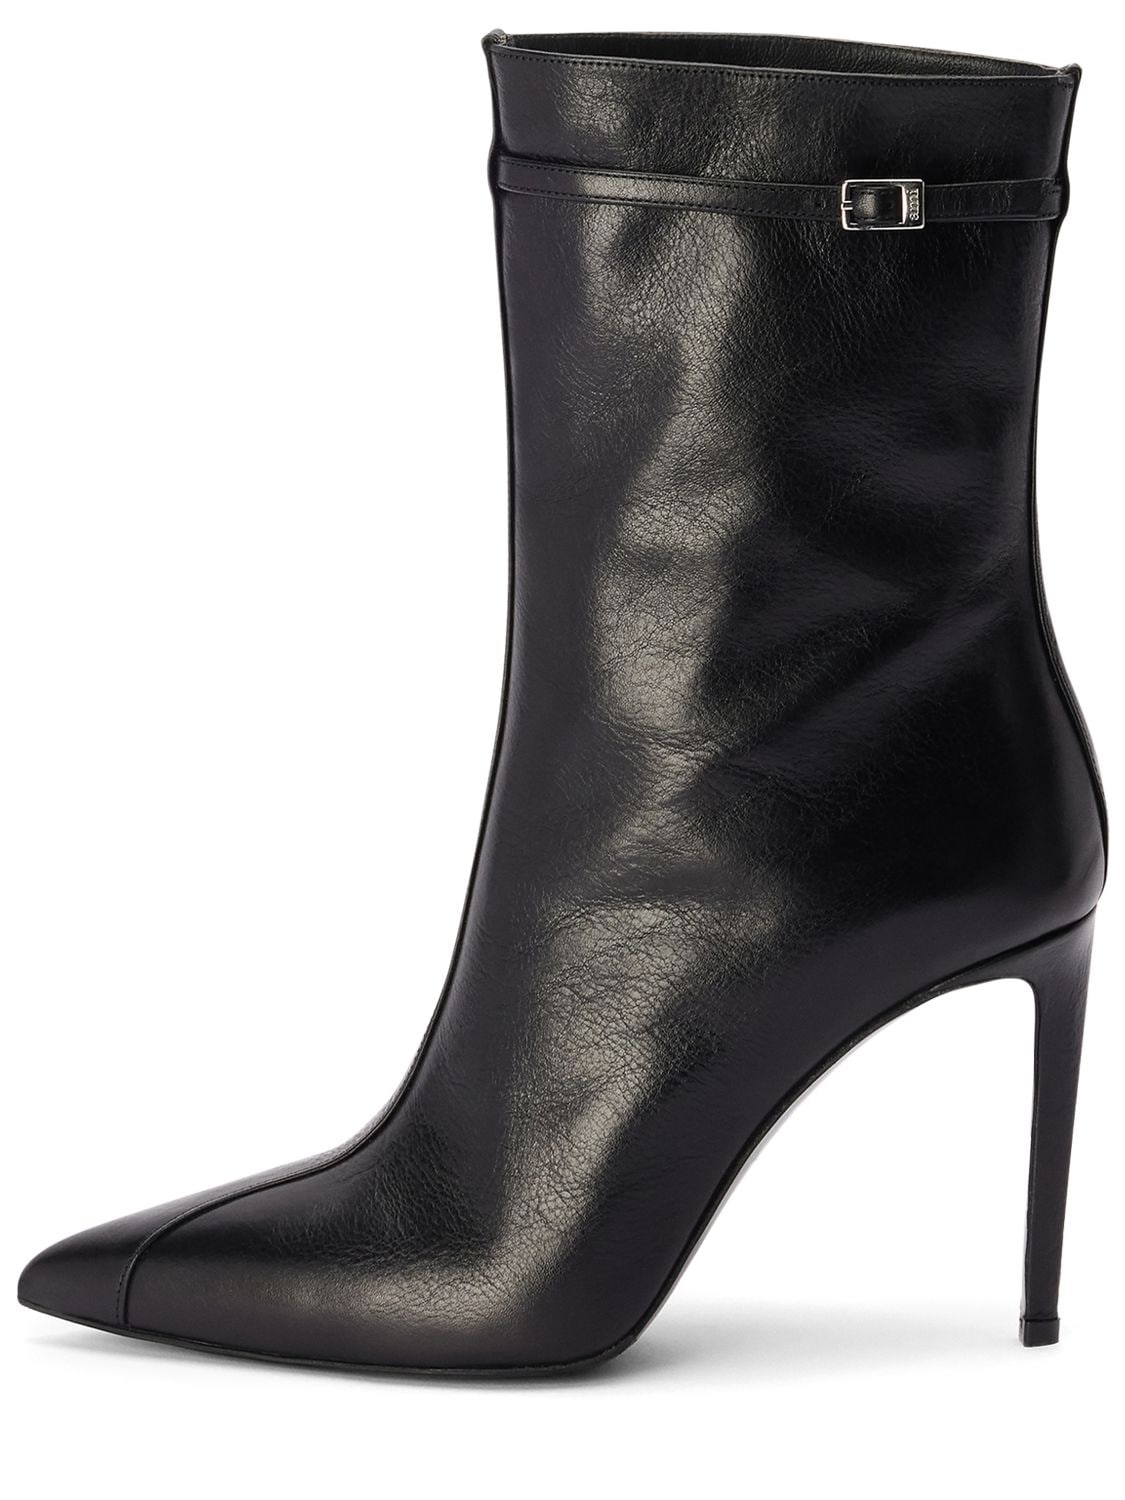 AMI ALEXANDRE MATTIUSSI 90MM LEATHER ANKLE BOOTS